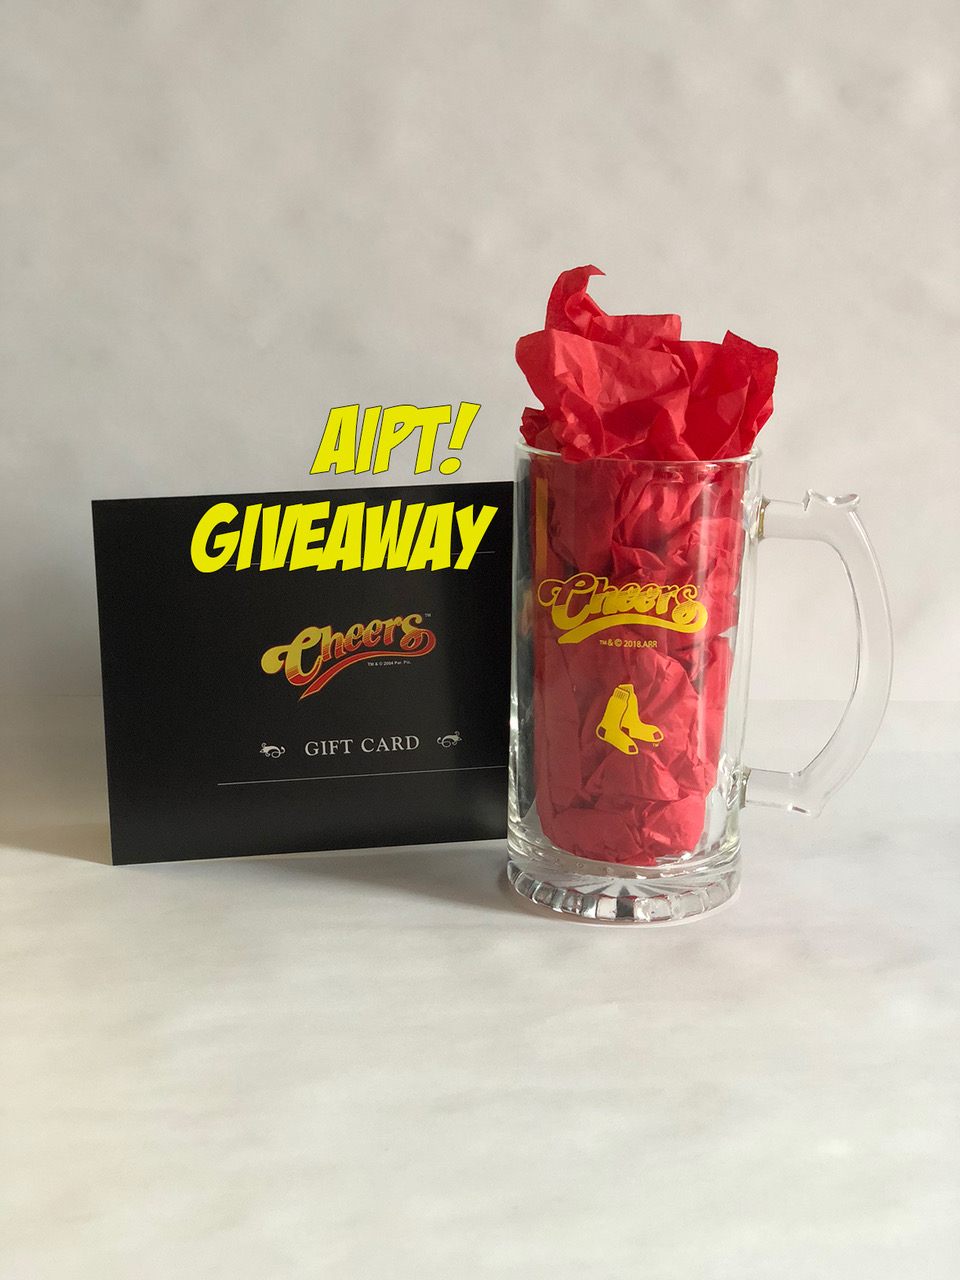 AiPT! Giveaway: Red Sox and Cheers pint glass with Cheers gift card